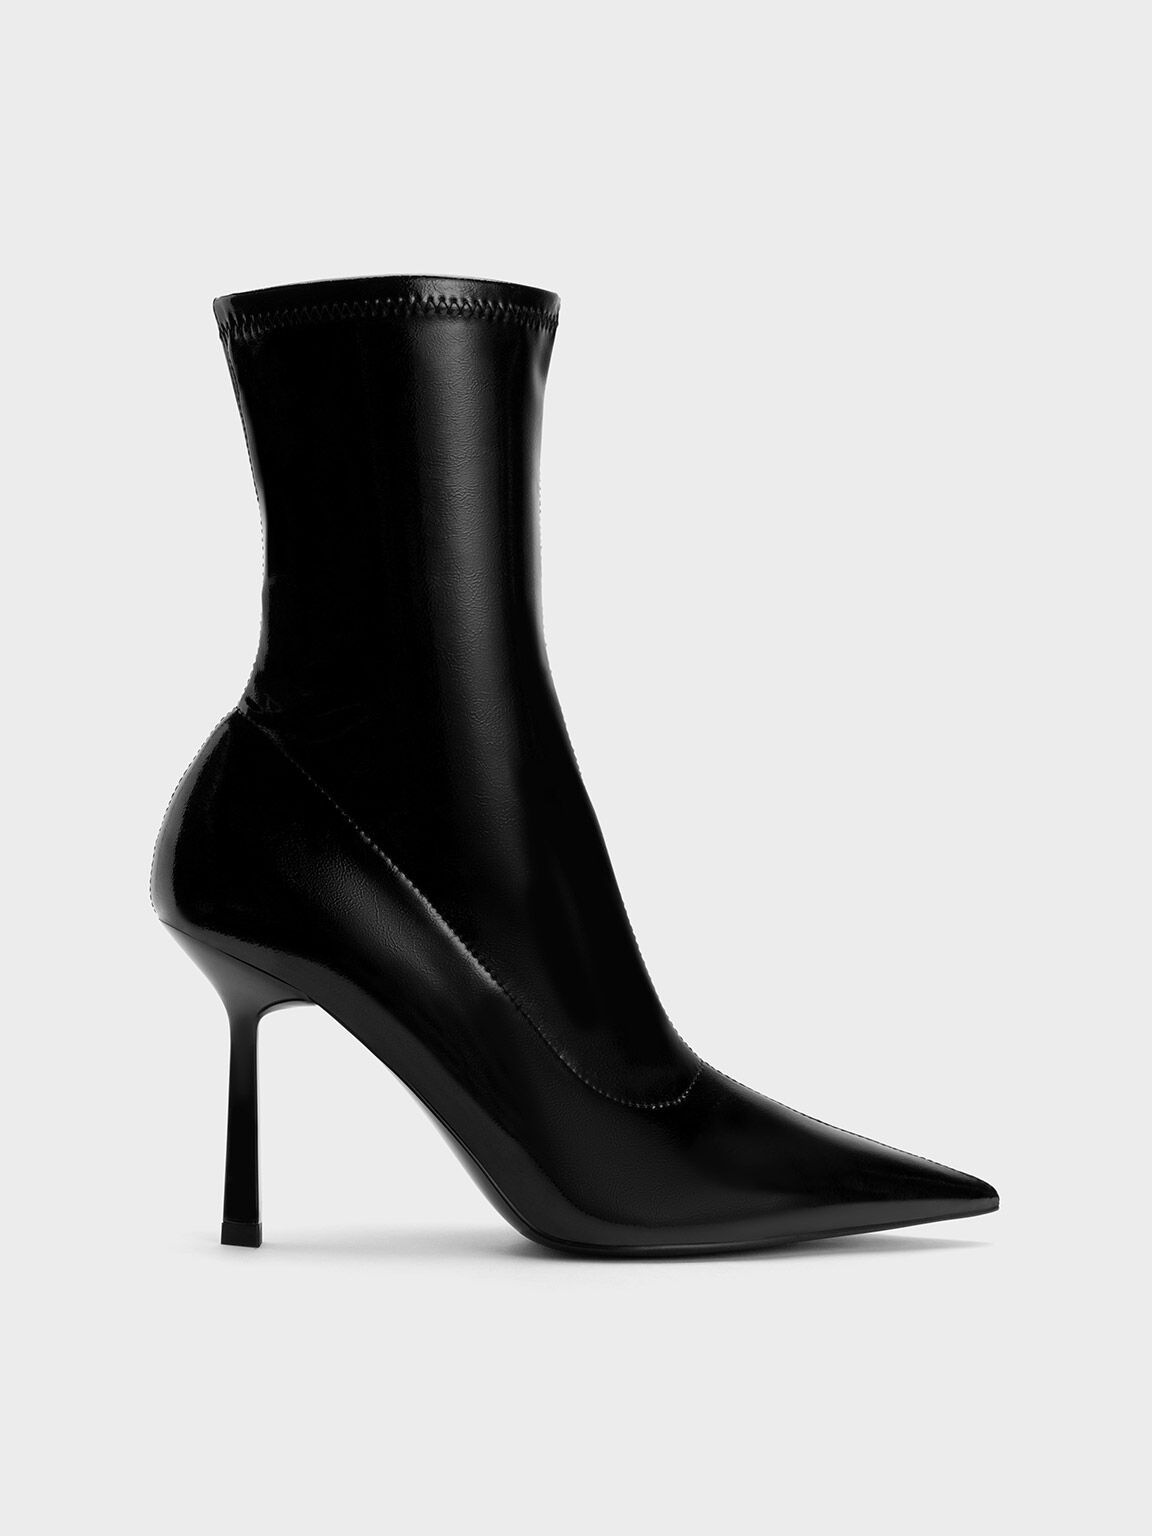 The Best Black Heeled Knee-High Boots, from £55 to £750 | Who What Wear